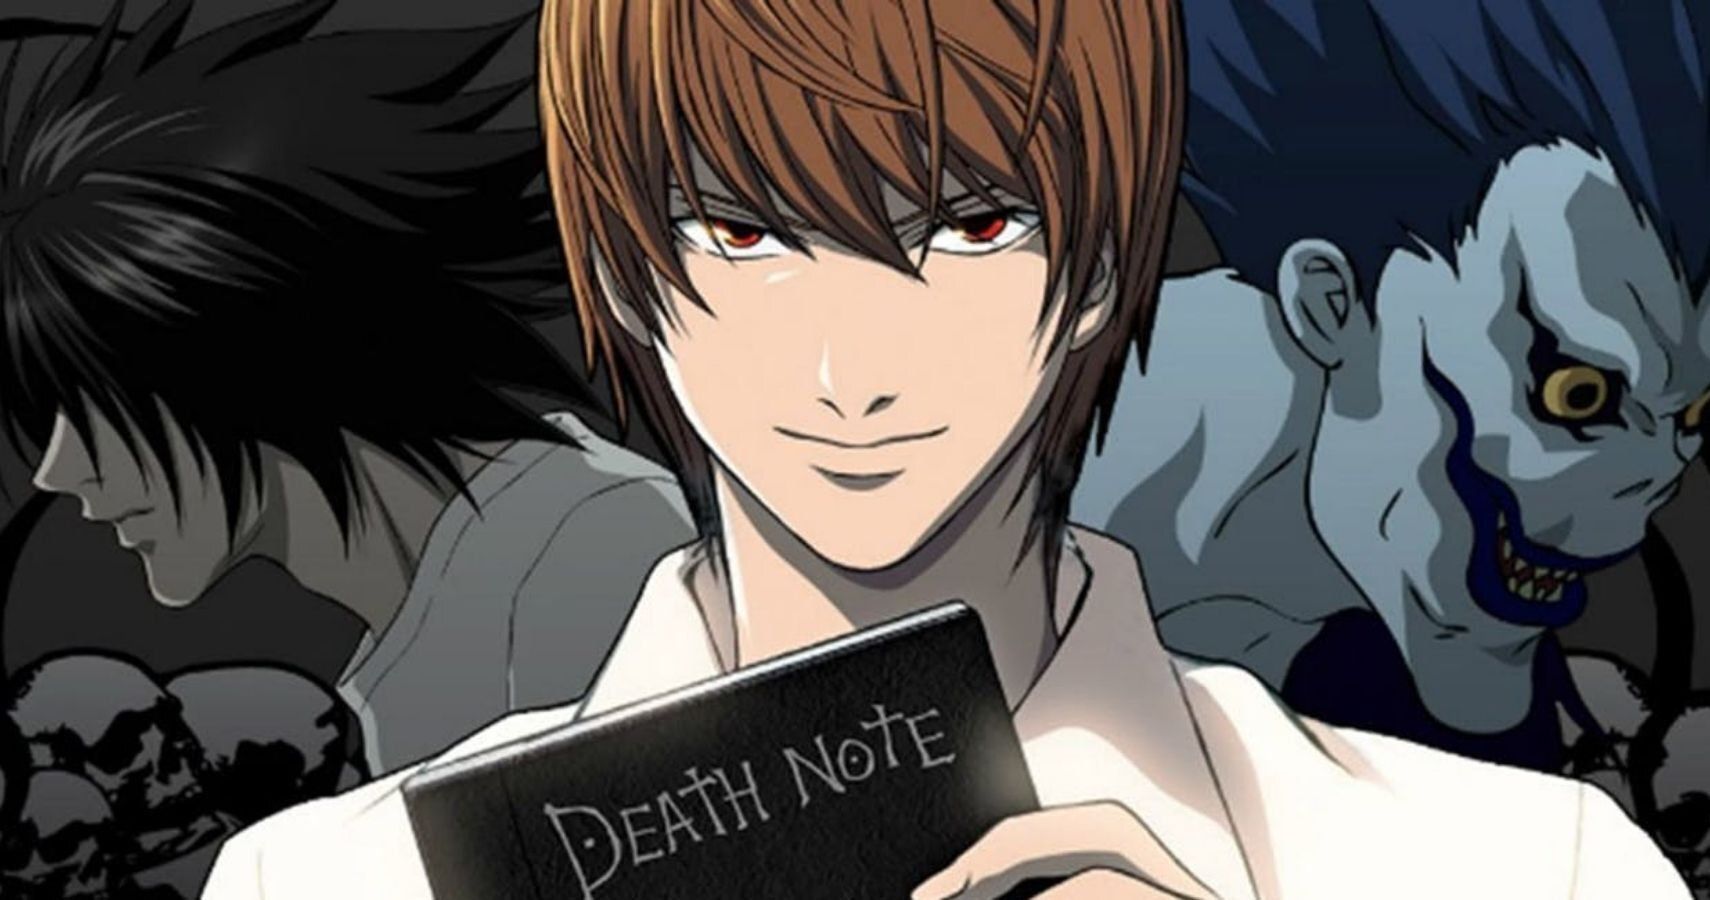 death note rules on halving a life